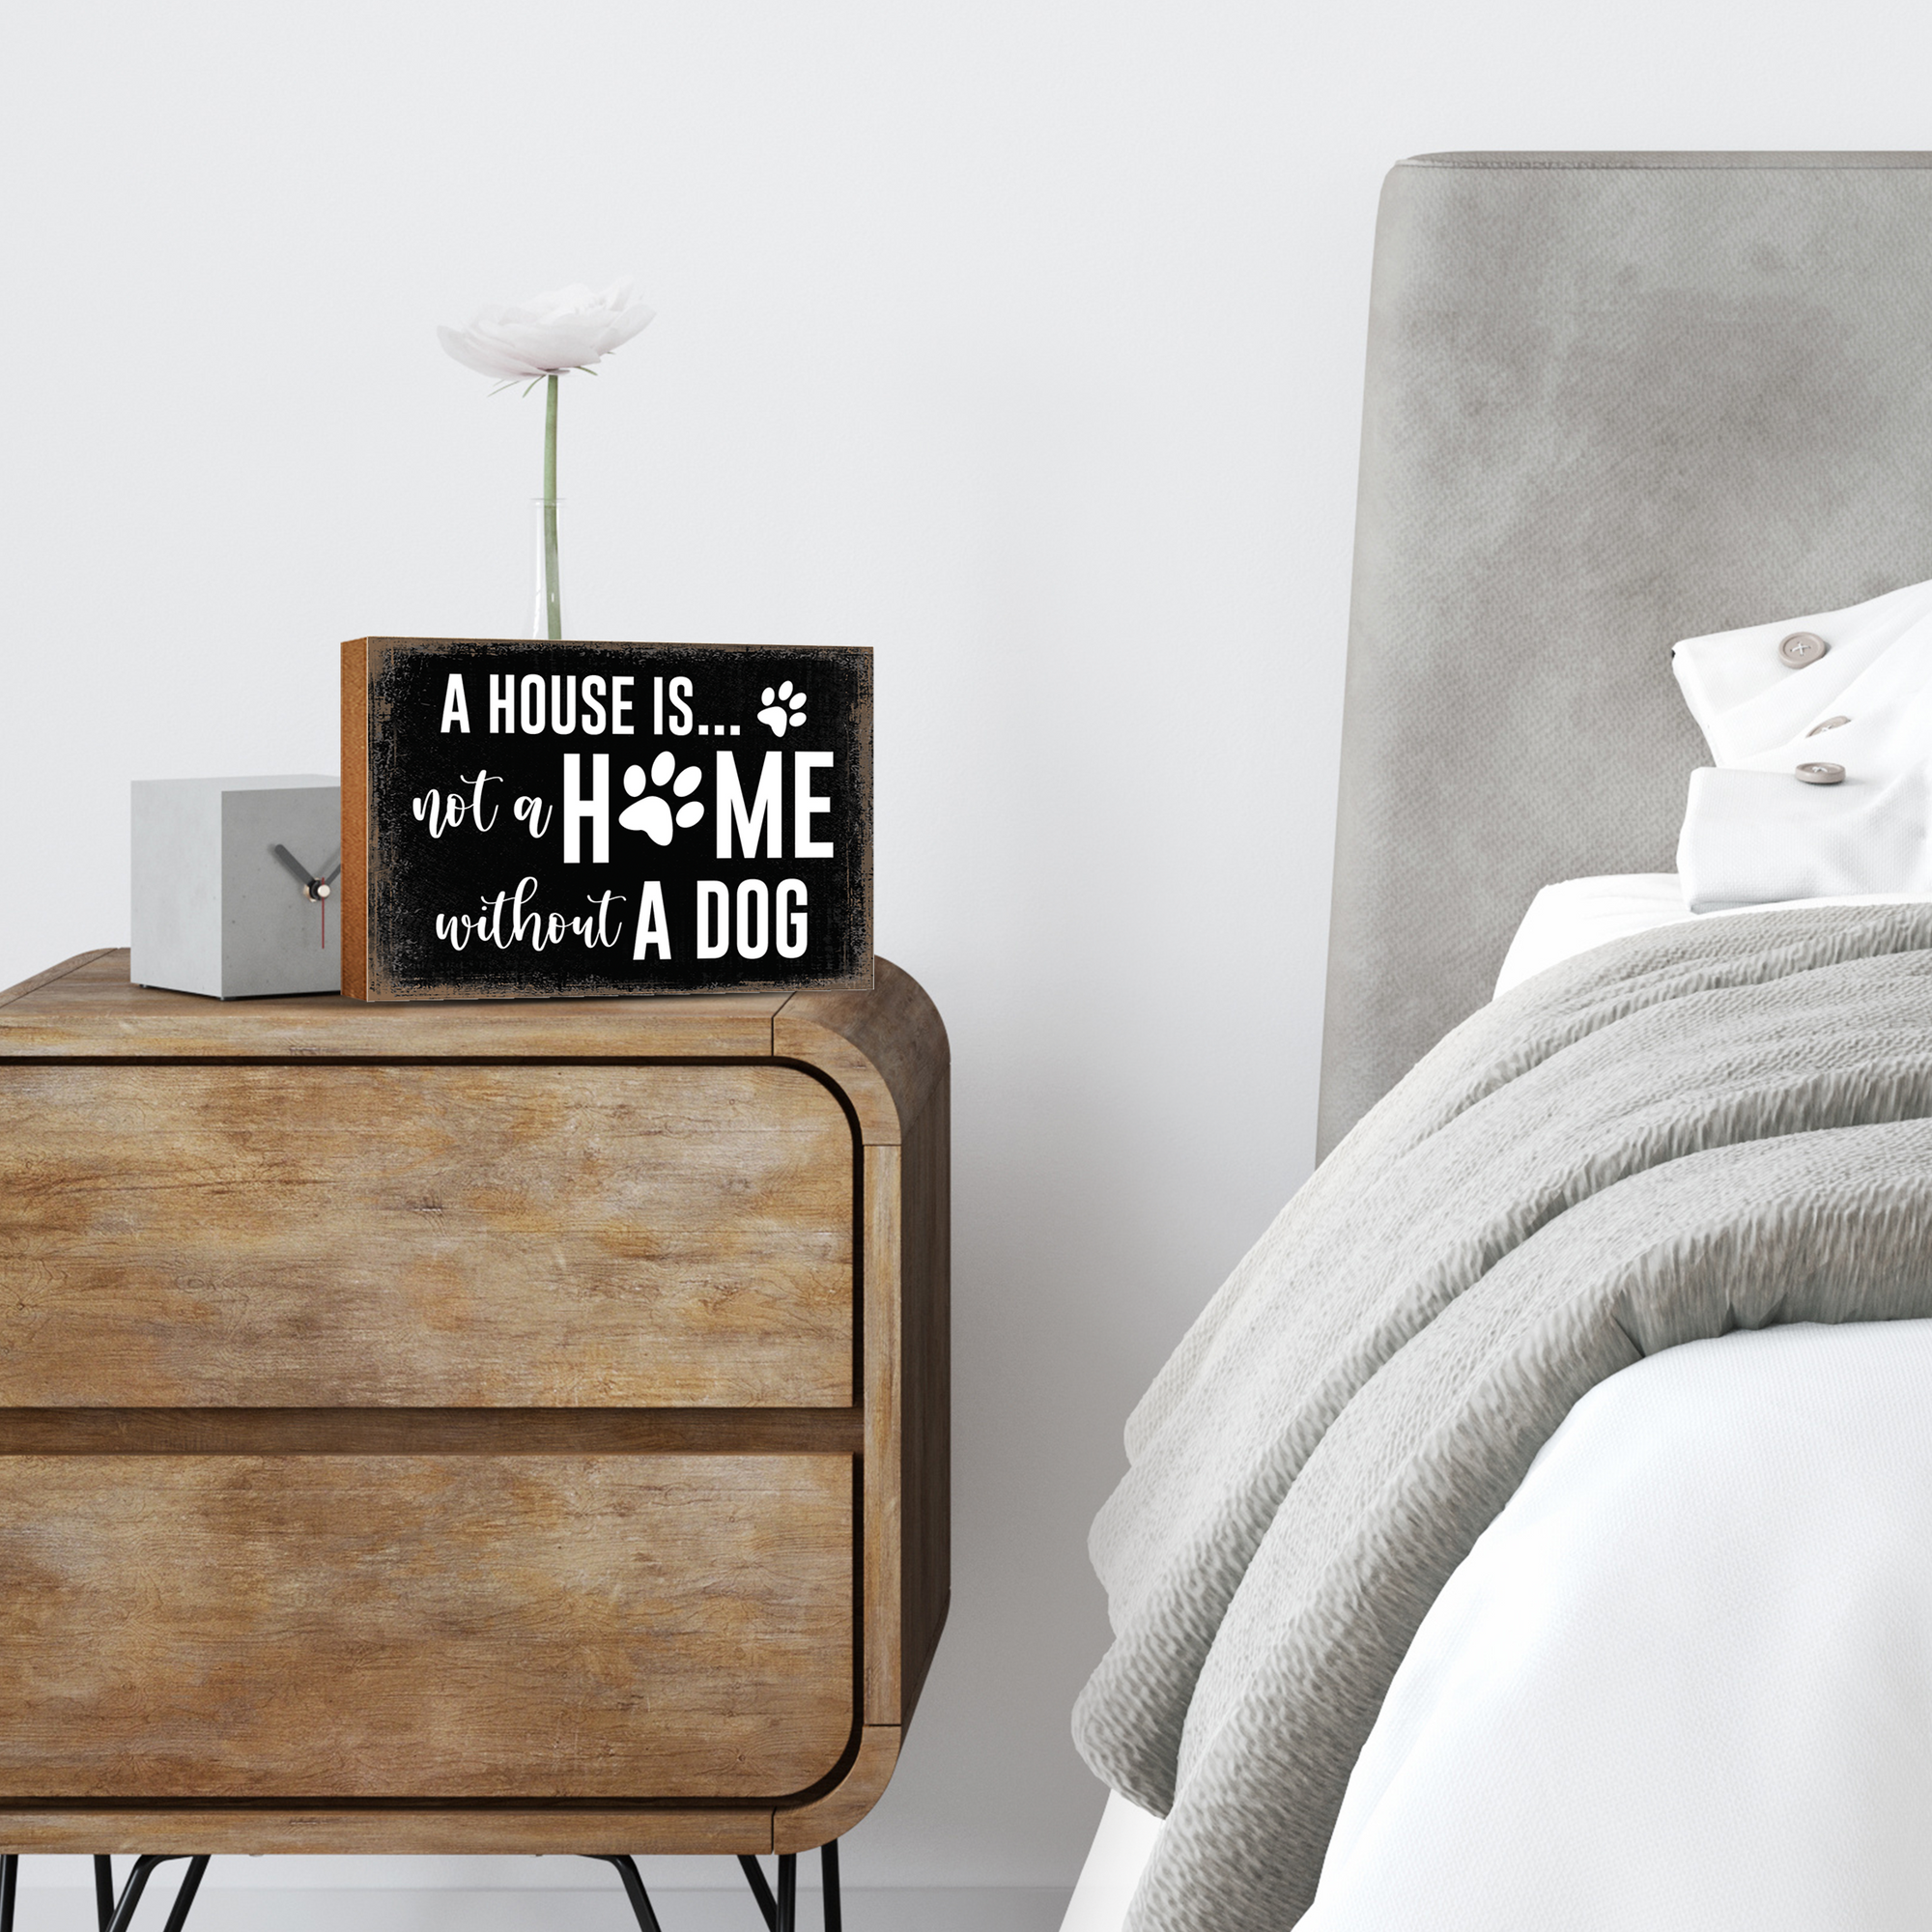 Wooden Shelf Decor and Tabletop Signs with Pet Verses - A House Is Not